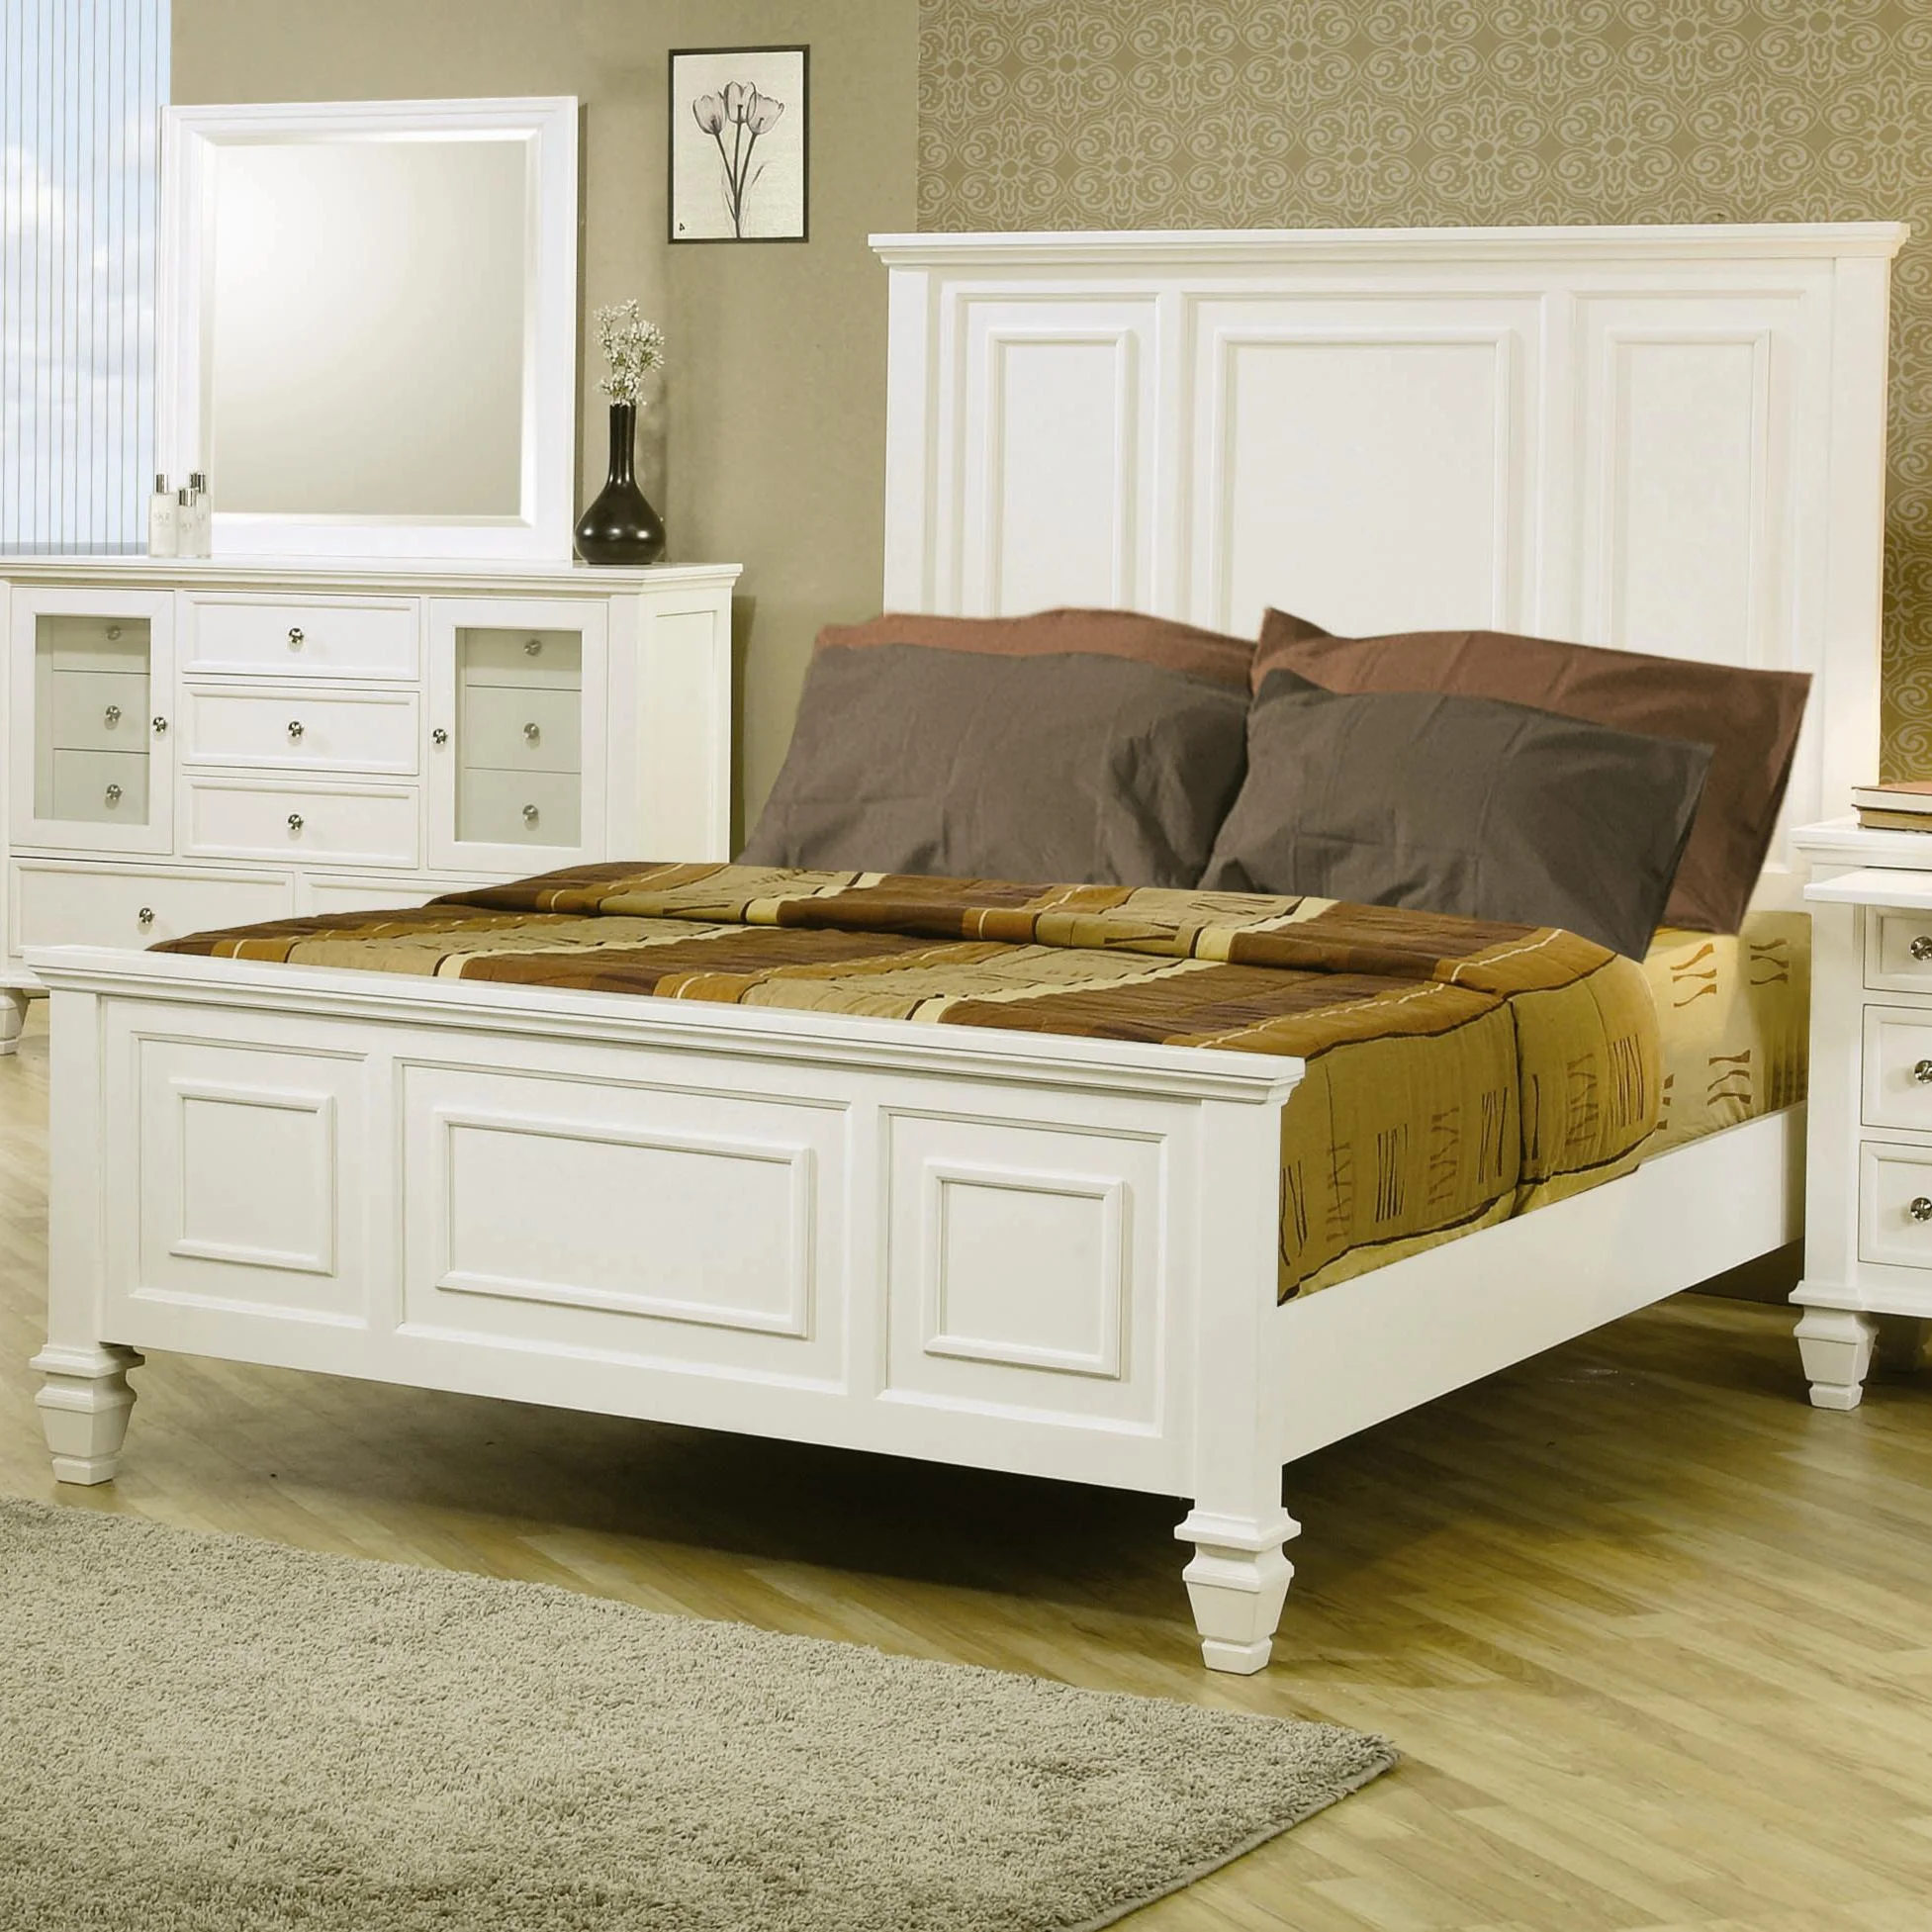 Coaster Sandy Beach 201301q Classic Queen High Headboard Bed Value City Furniture Panel Beds